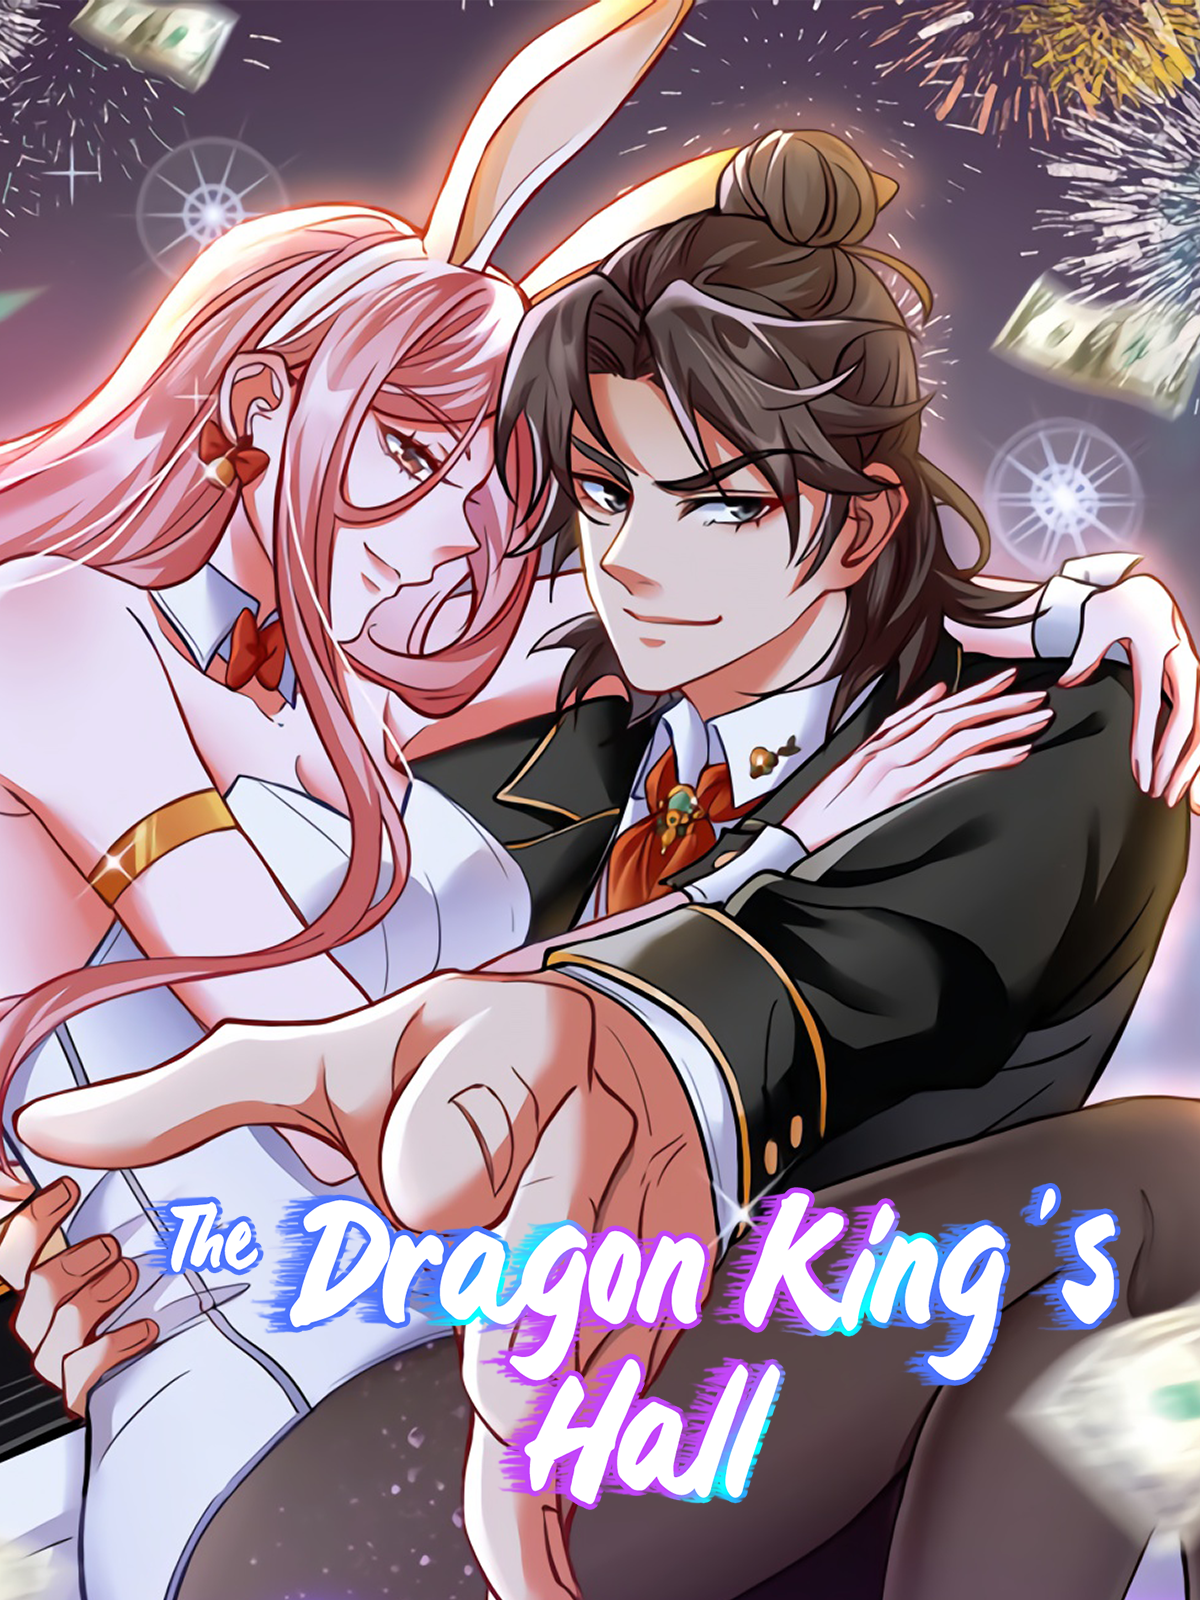 The Dragon King's Imperial Wrath: Falling in Love with the Bookish Princess  of the Rat Clan | Seven Seas Entertainment